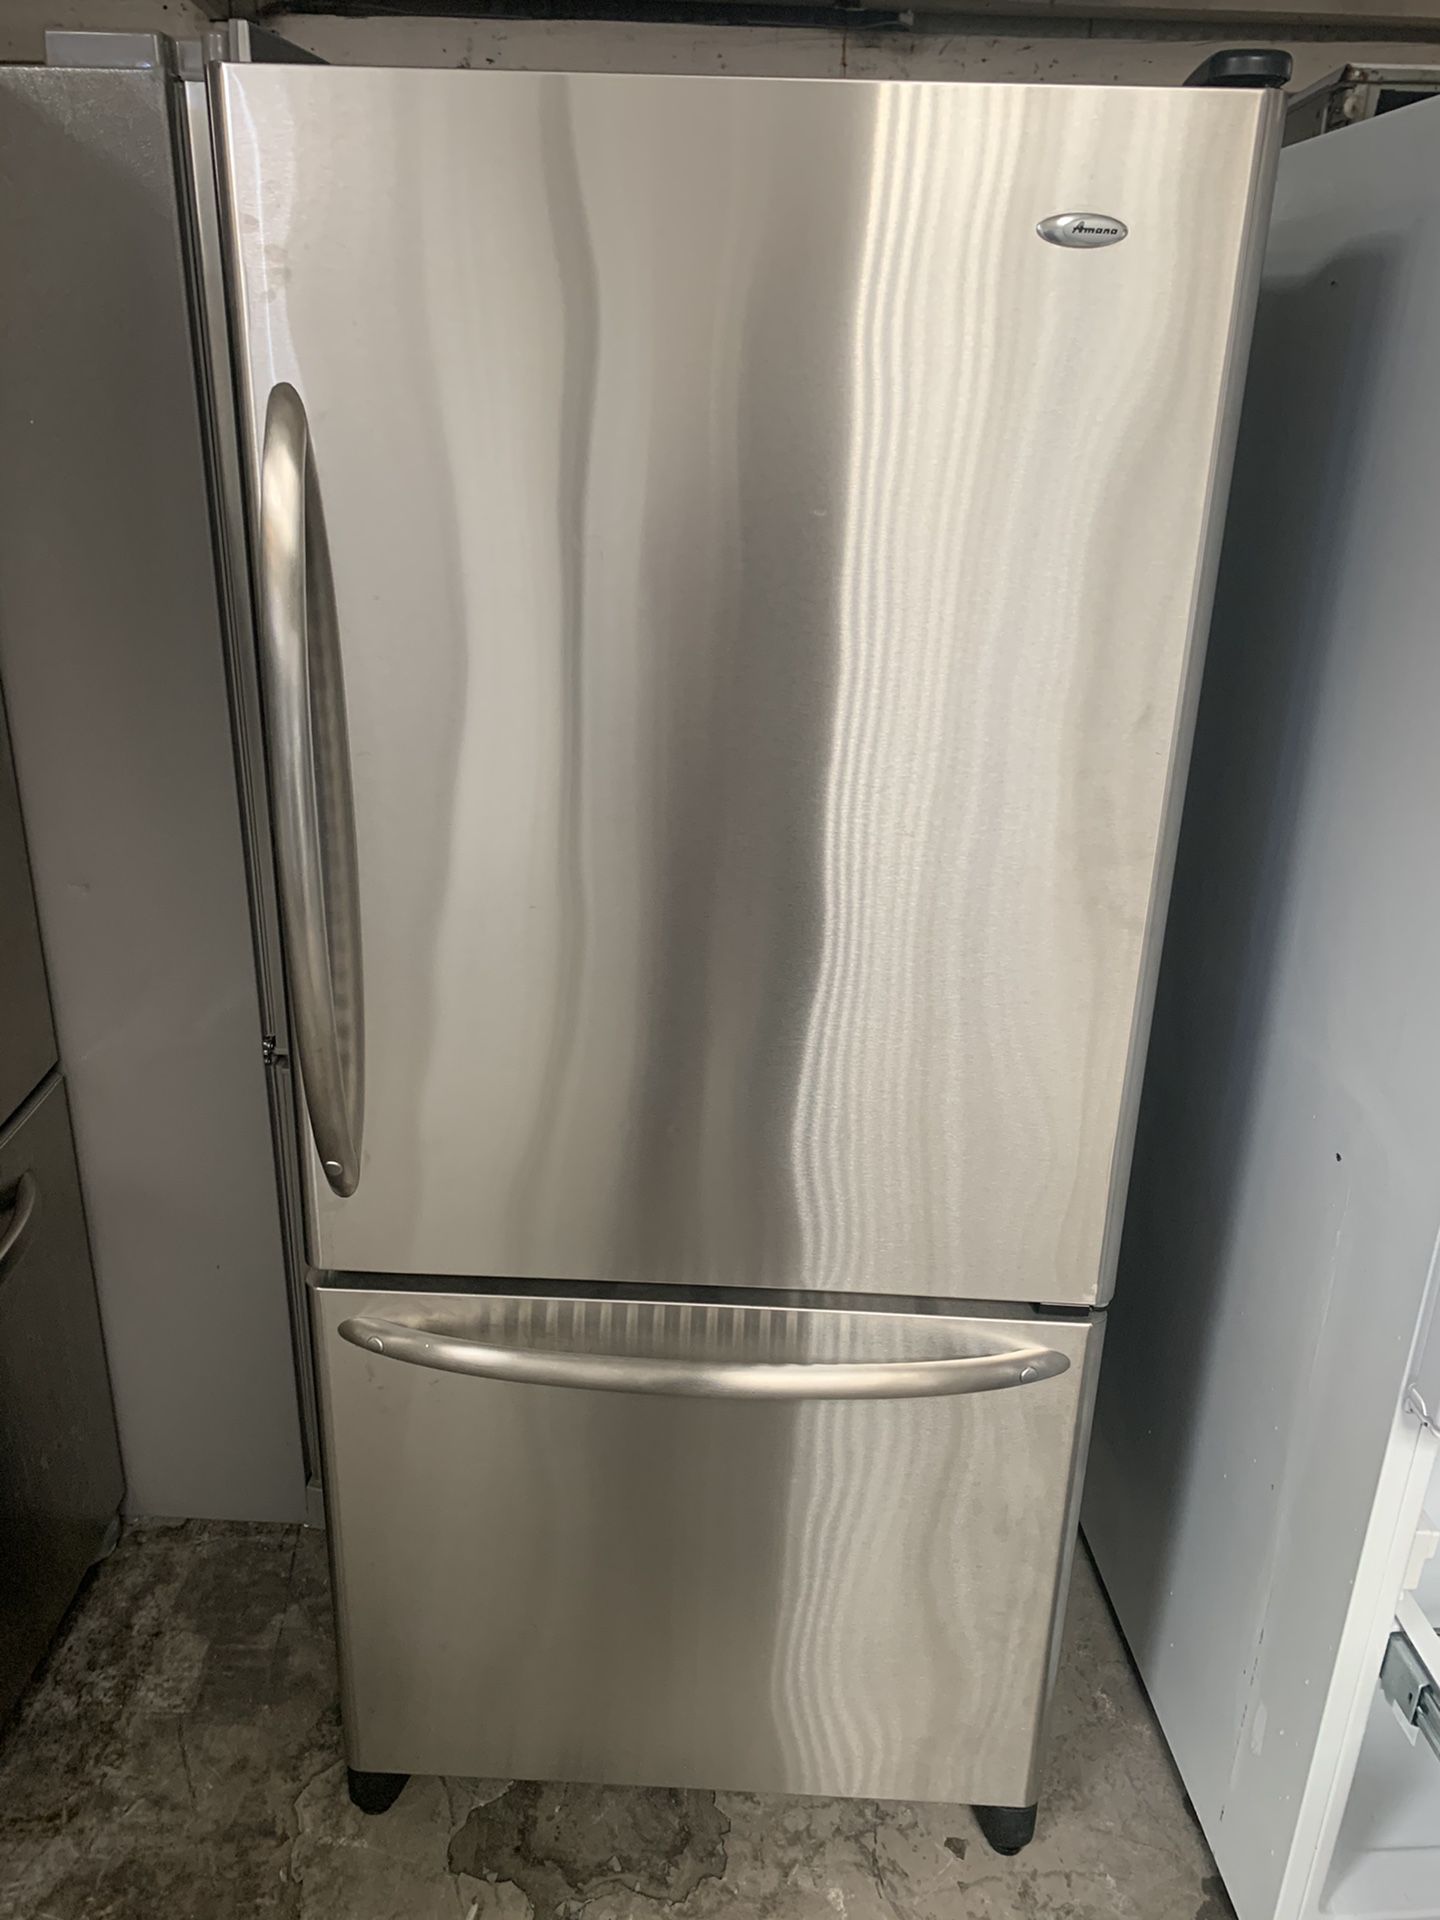 Refrigerator brand Amana everything is good working condition 90 days warranty delivery and installation